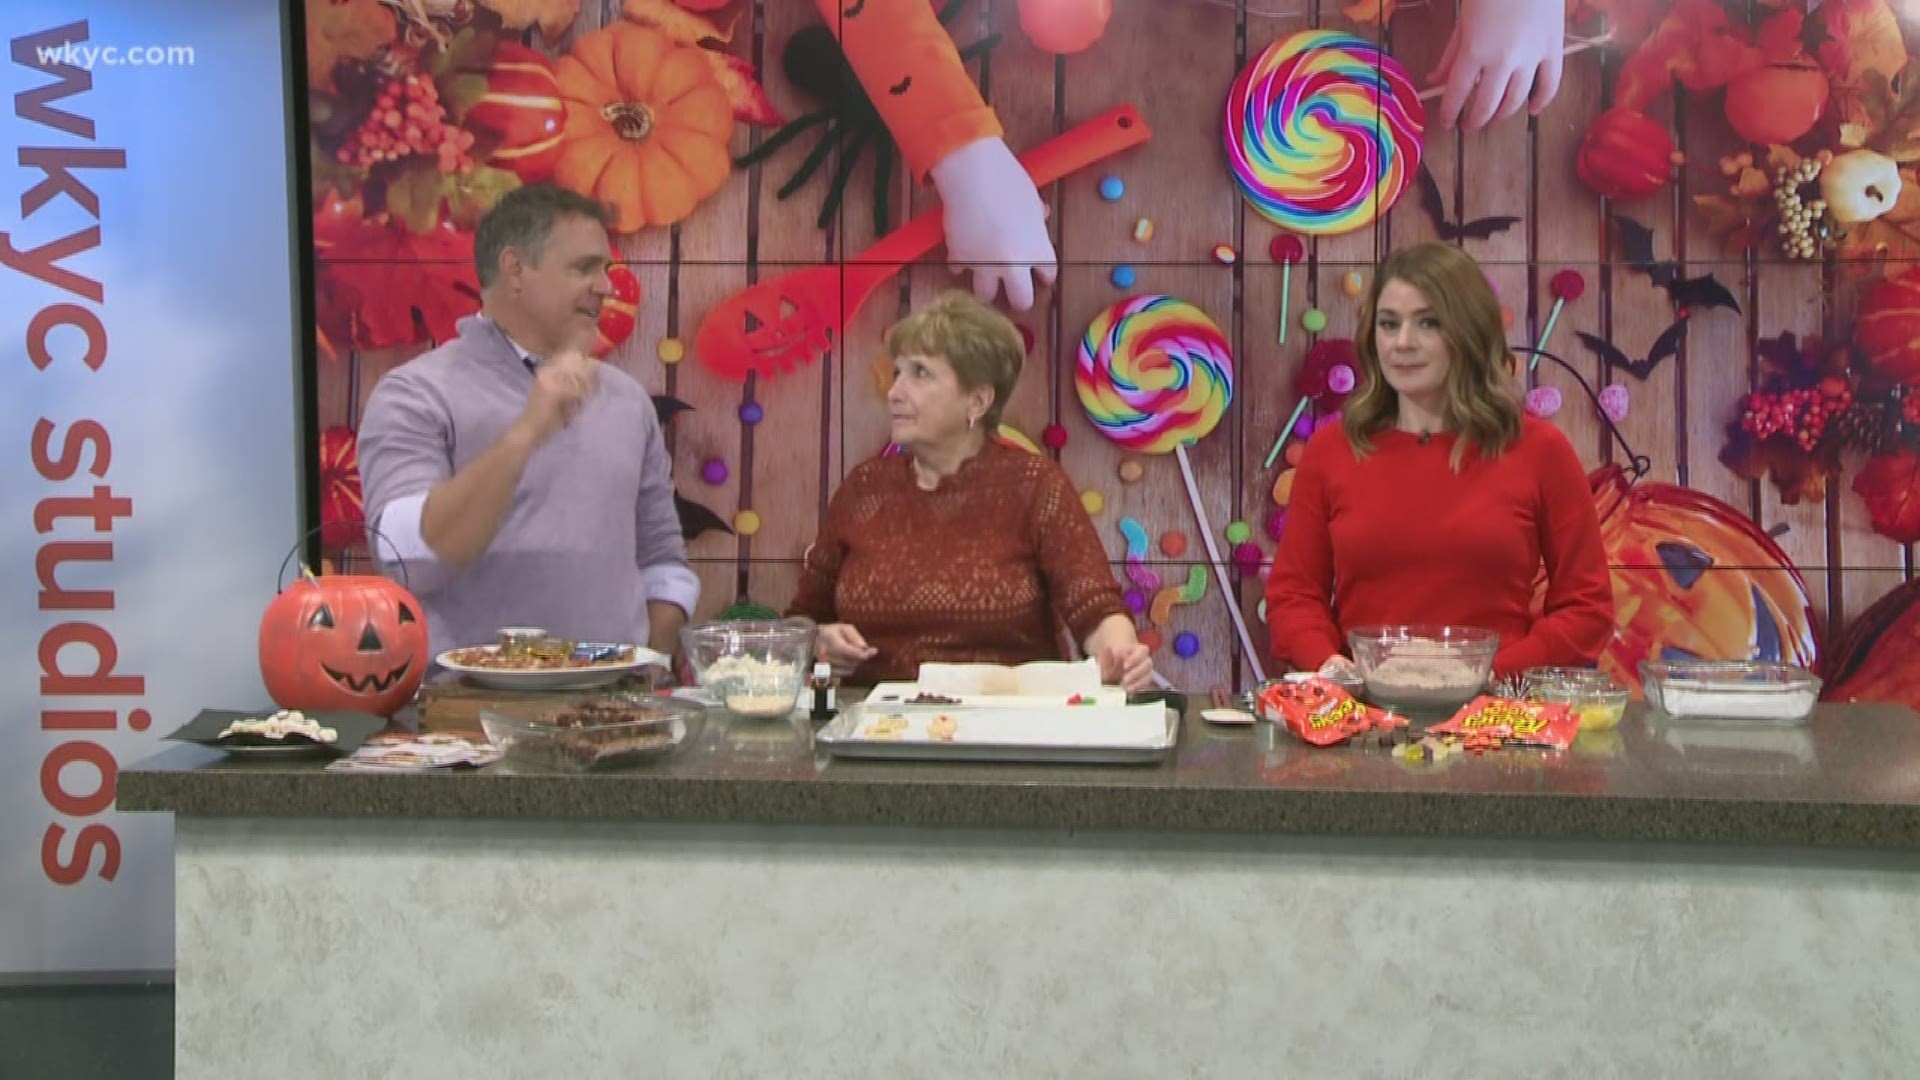 Loretta Paganini, owner of the Loretta Paganini School of Cooking, stops by Lunch Break to share idea for treats you can make with your leftover candy haul.